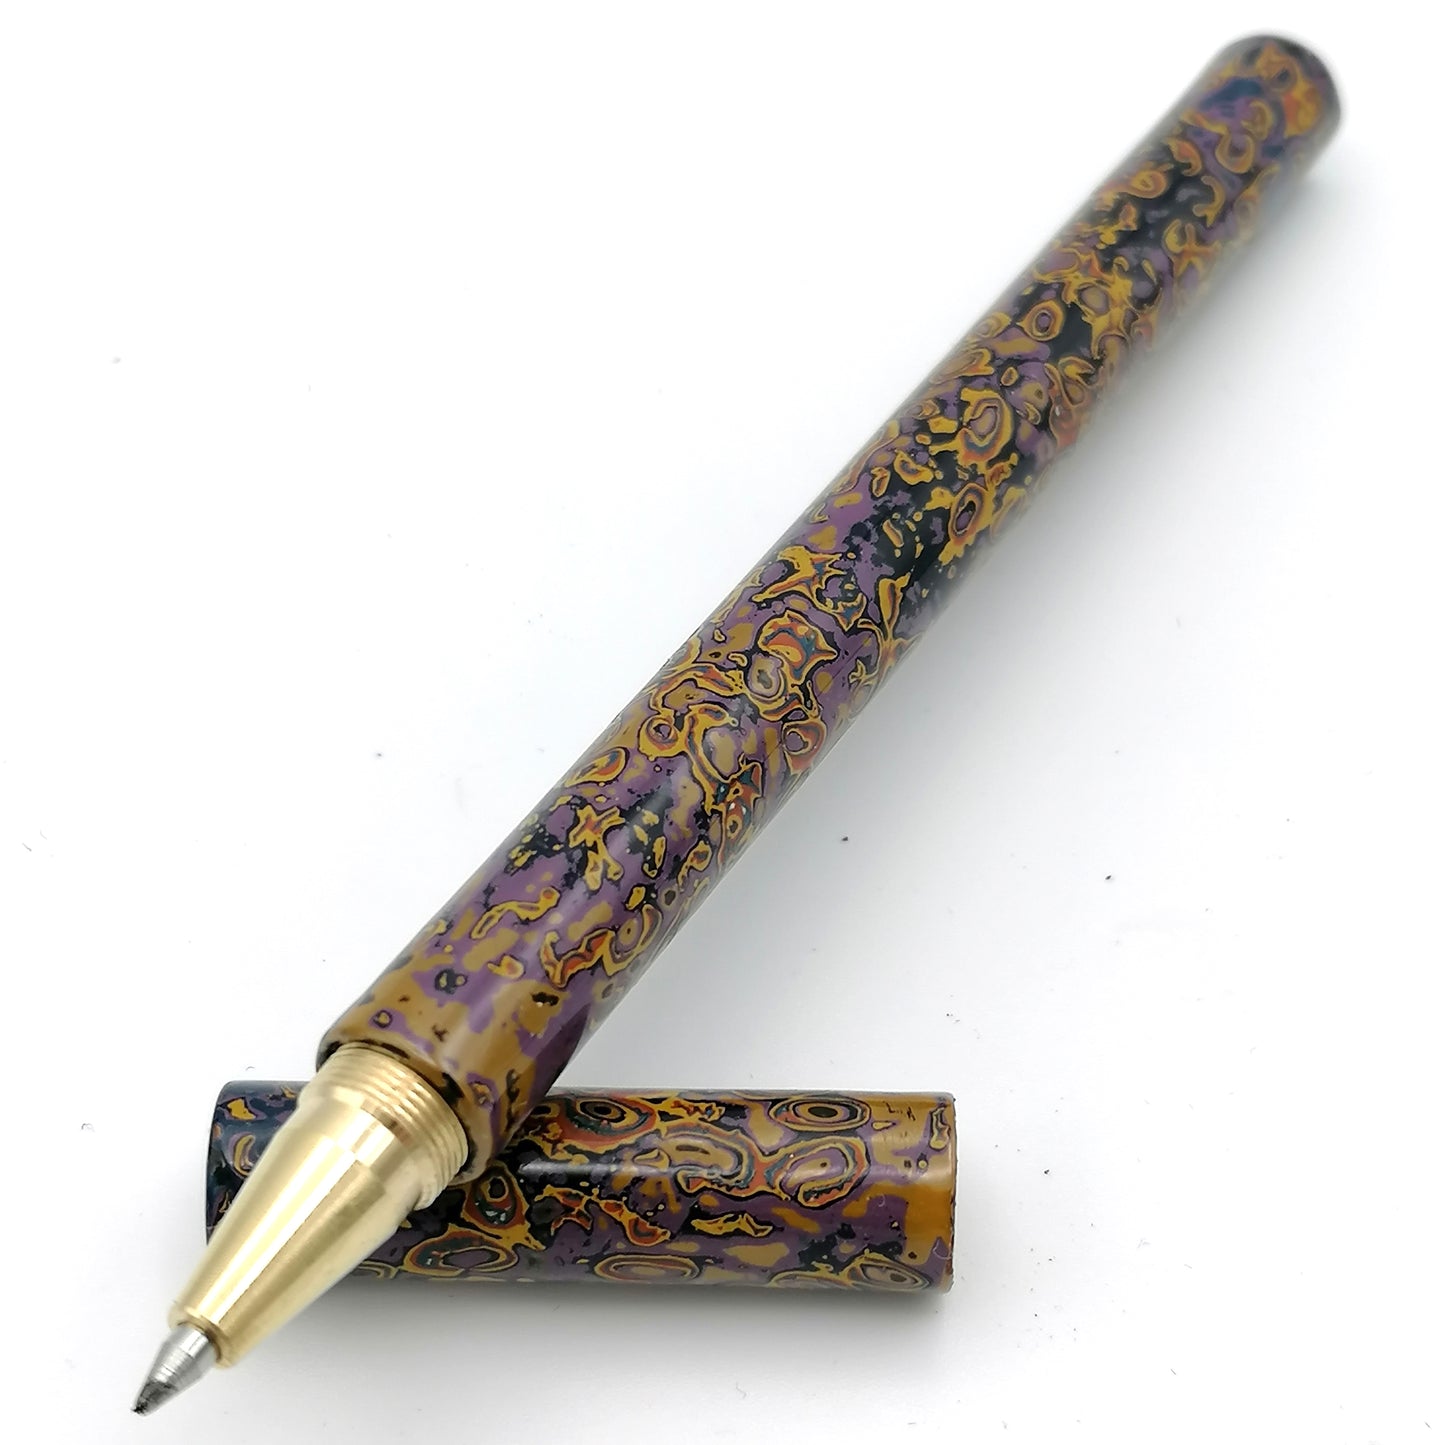 Tambo Solid Brass Pen in purples oranges and yellows